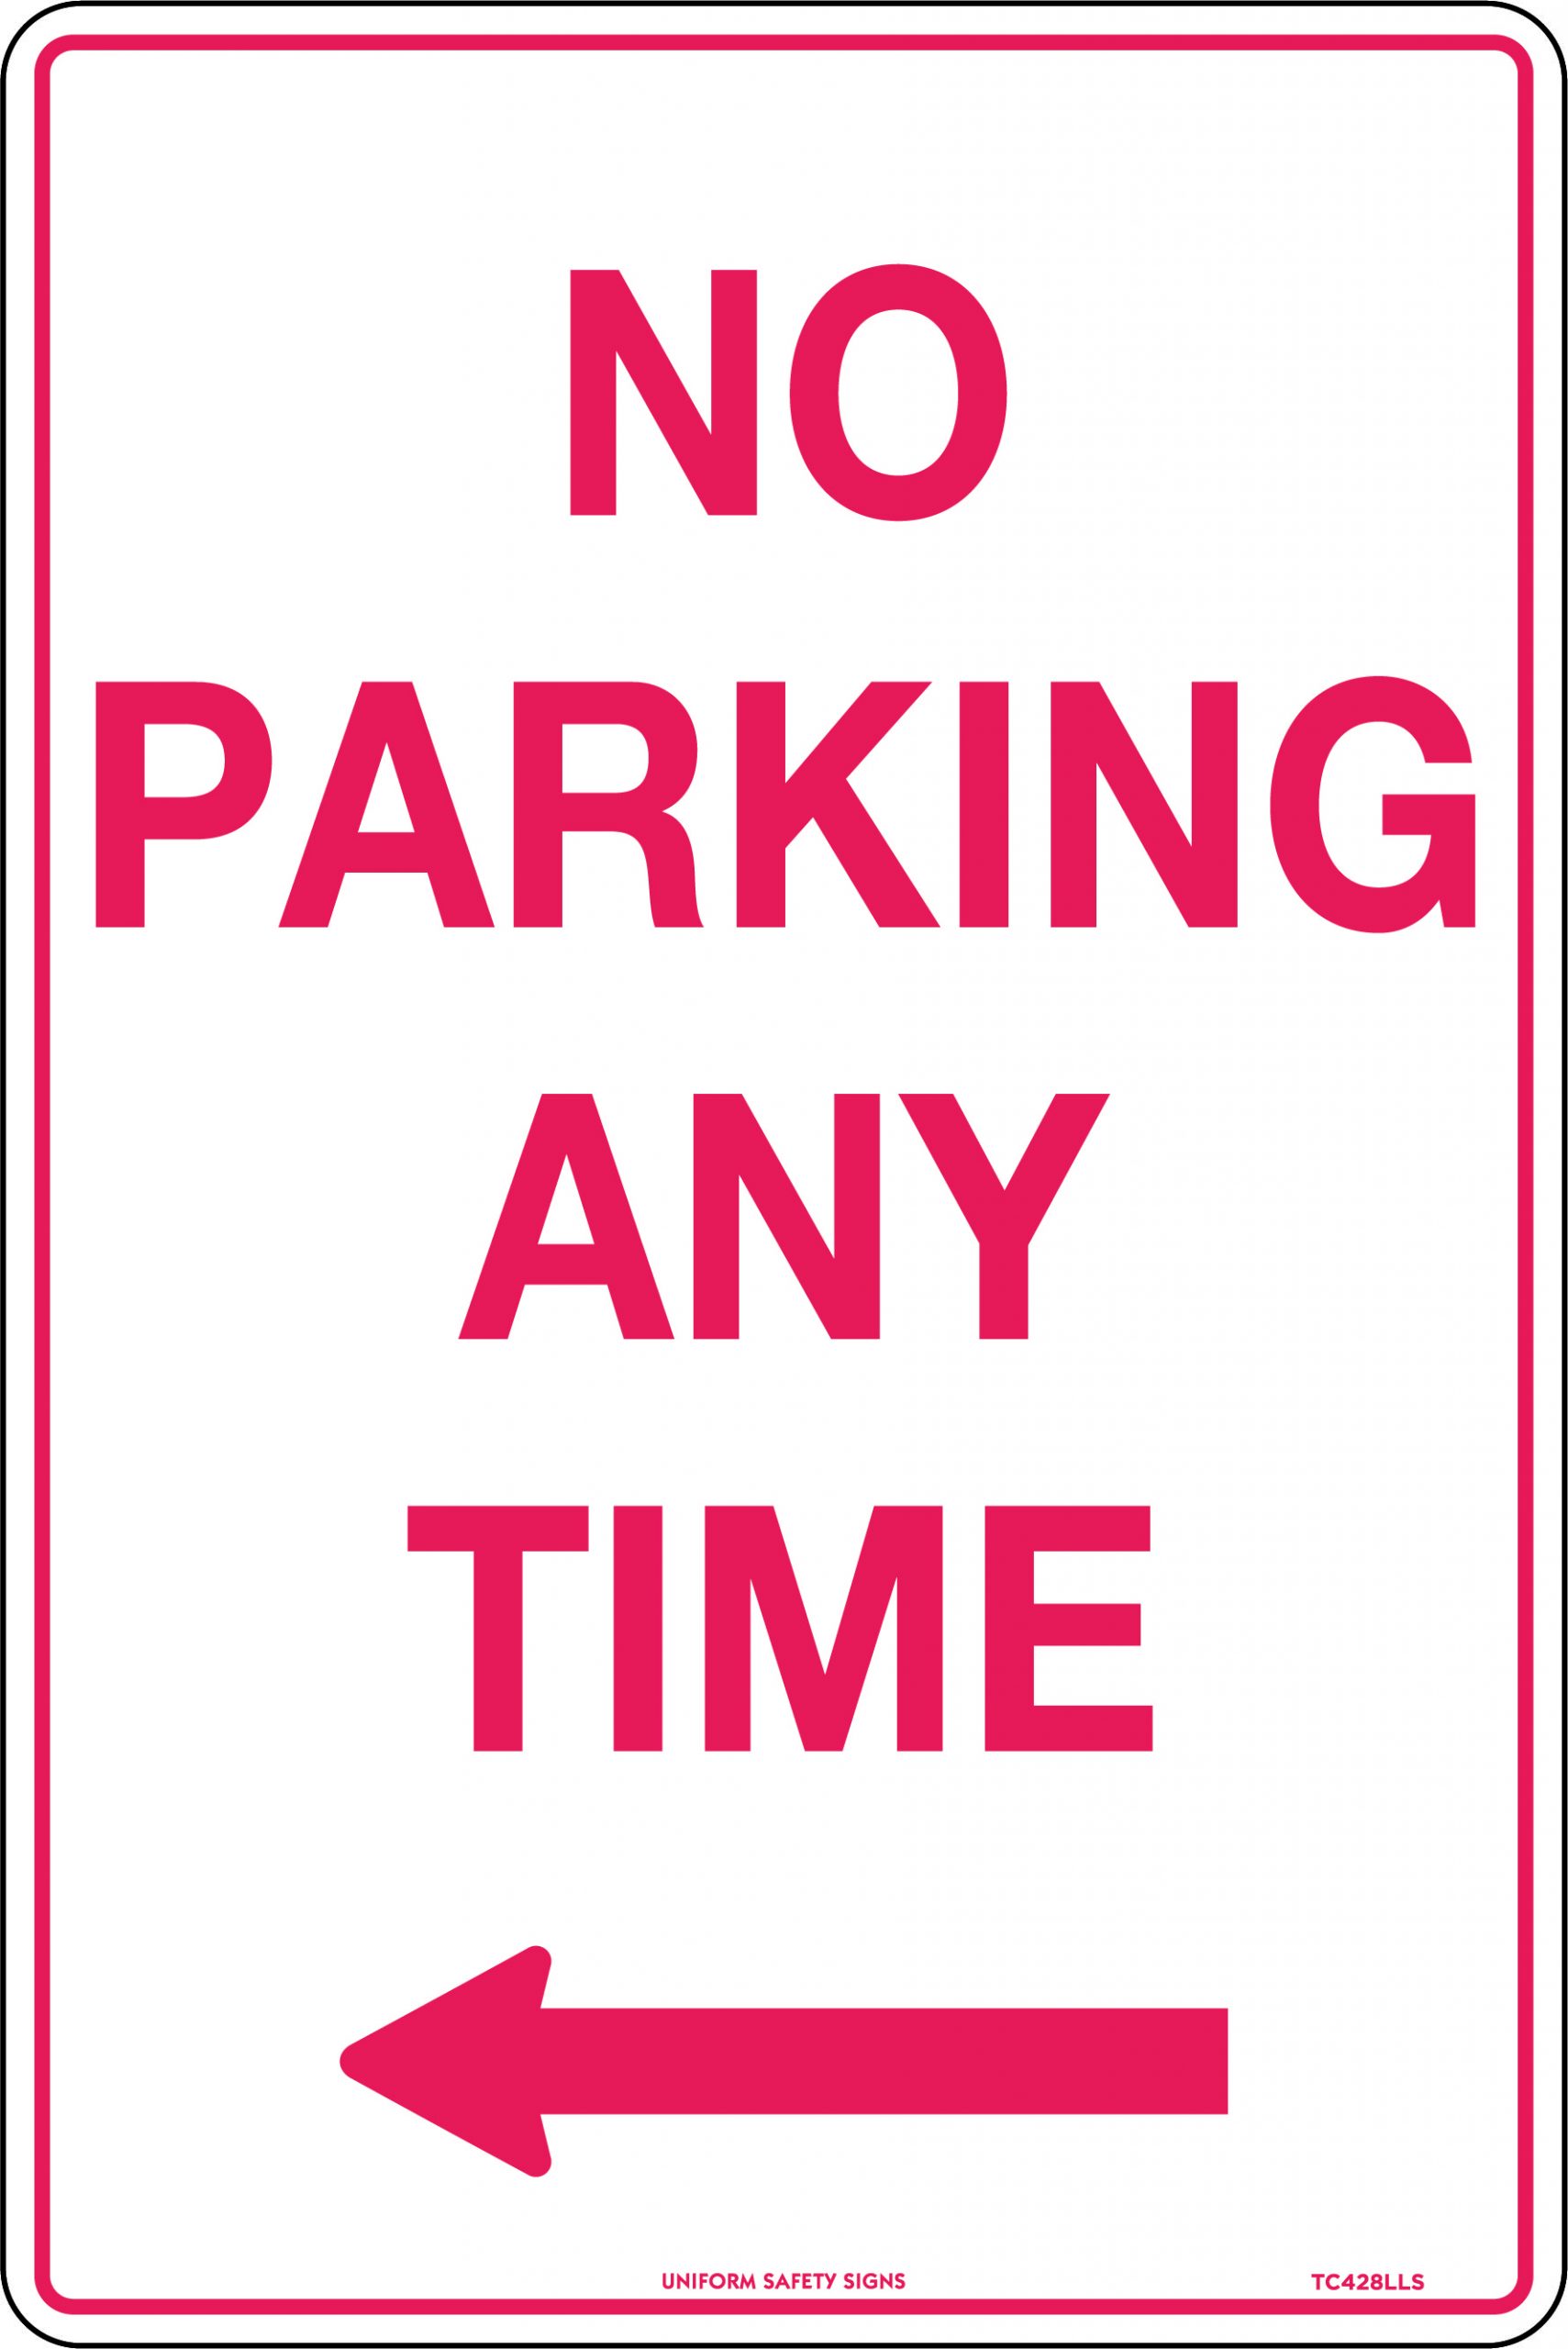 SIGN 450 X 300MM CLASS 2 METAL NO PARKING ANY TIME WITH LEFT ARROW